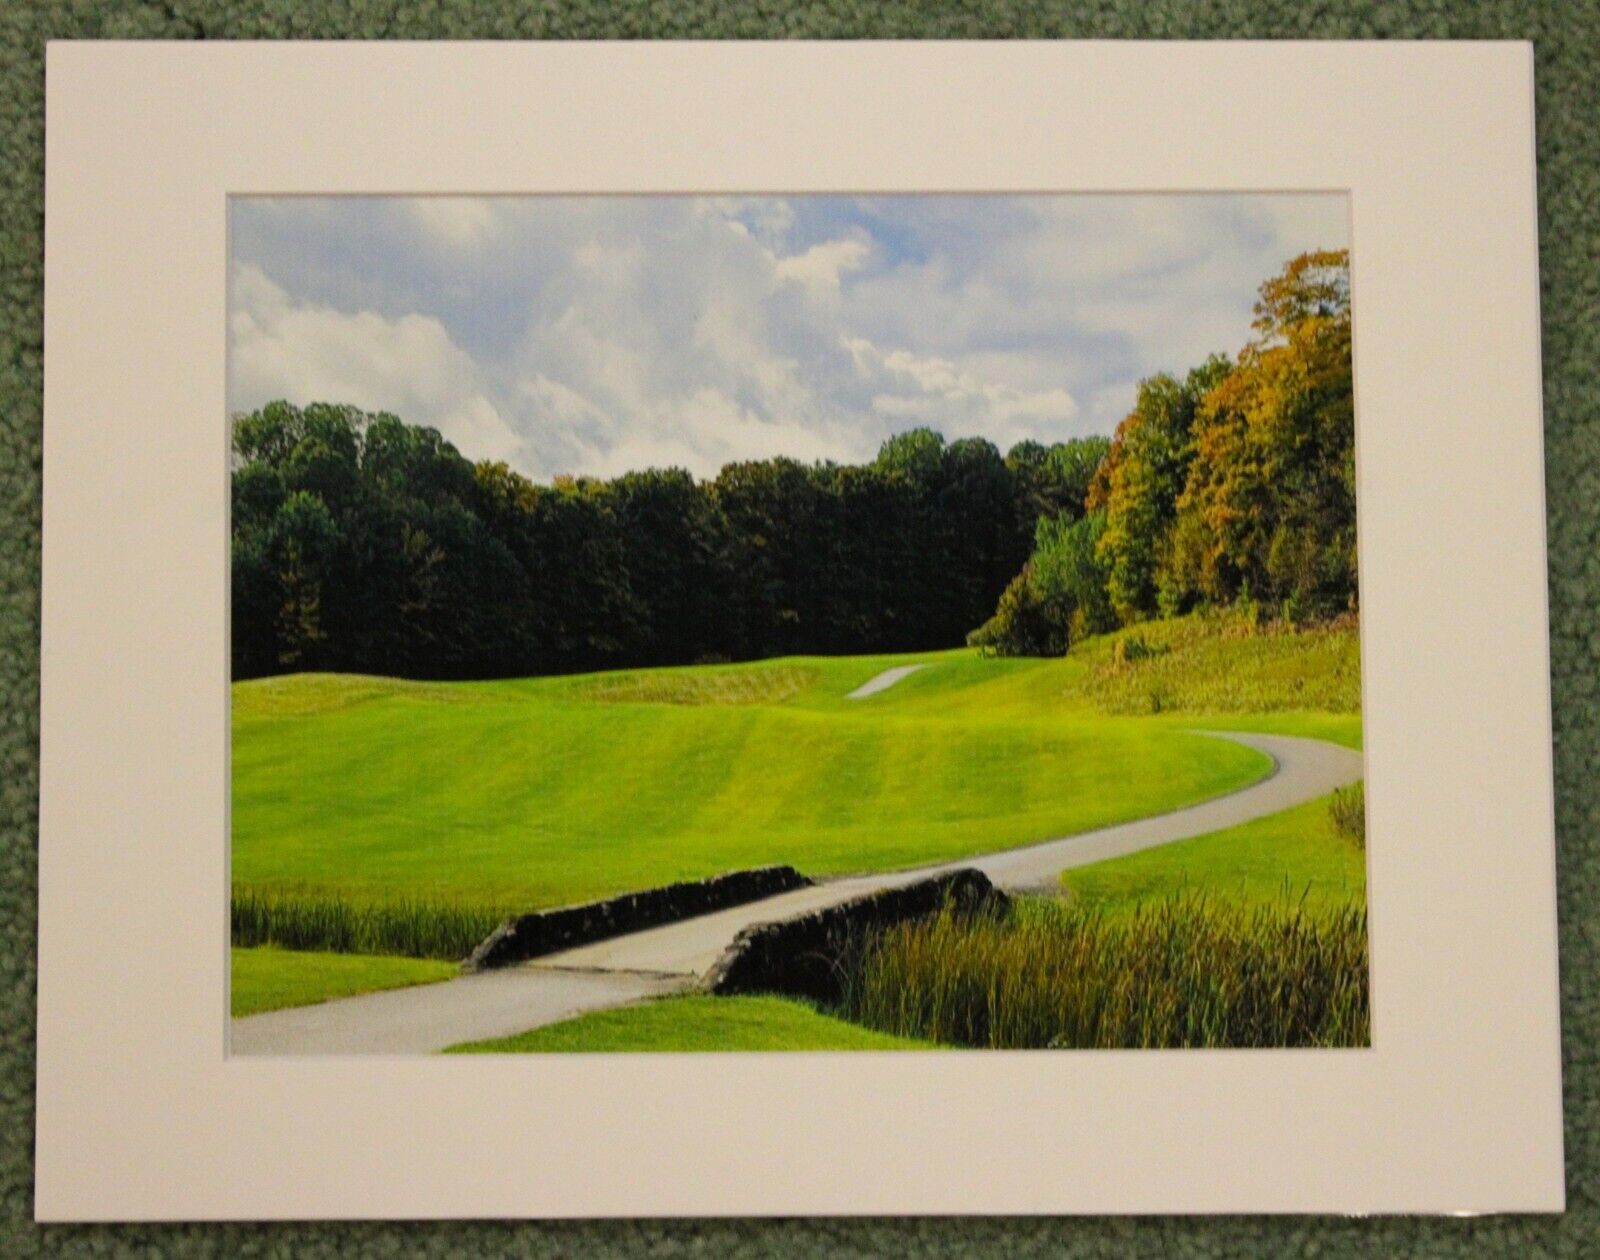 Digital Matted Color Signed Photograph Gorgeous Golf Cart Bridge Path by Martin